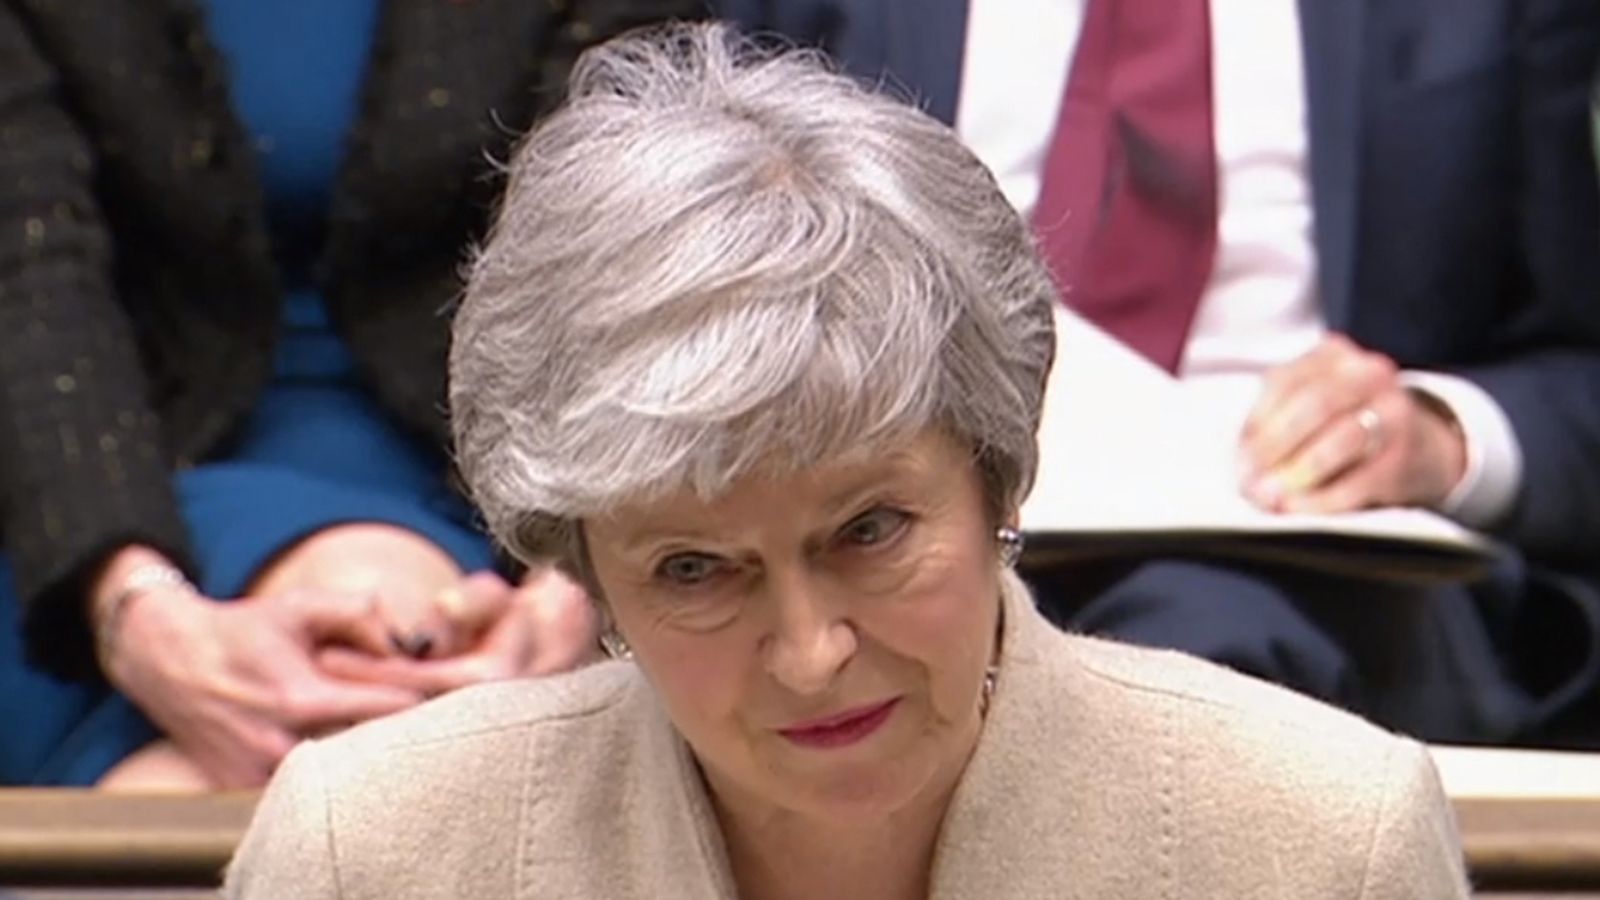 Brexit Theresa May Ponders Fourth Vote To Save Brexit Deal Politics 5317